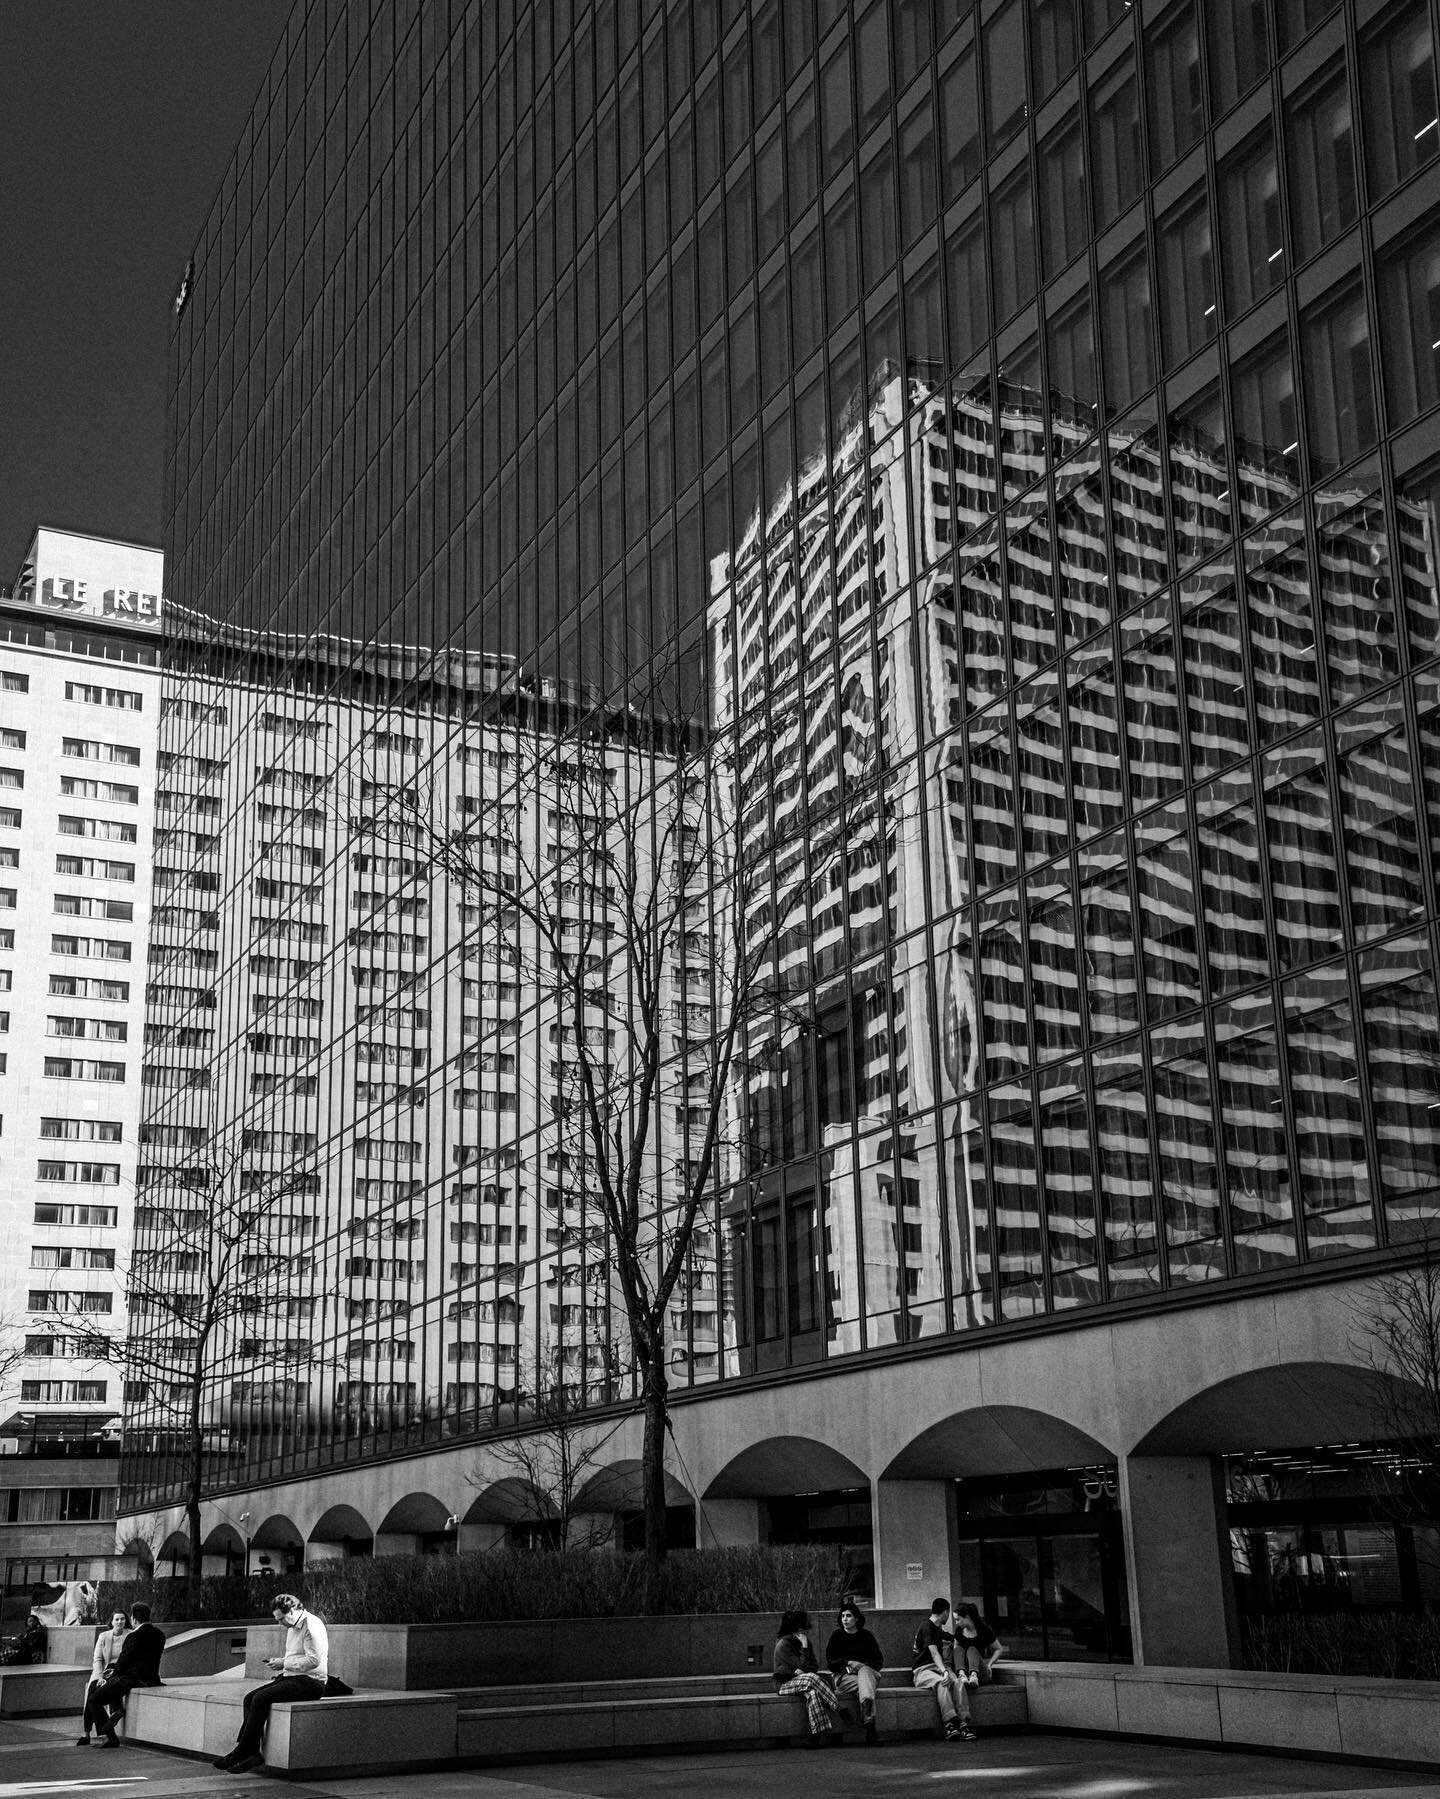 Reflecting. #cityspace #architecture #reflection #mirror #monochrome #blackandwhite #bnwphotography #bnwgang #montreal #mtl #downtown #fujiX100v #igers #igerscanada #thismtl #igersmontreal #mtl_unscripted #streetlifeshow